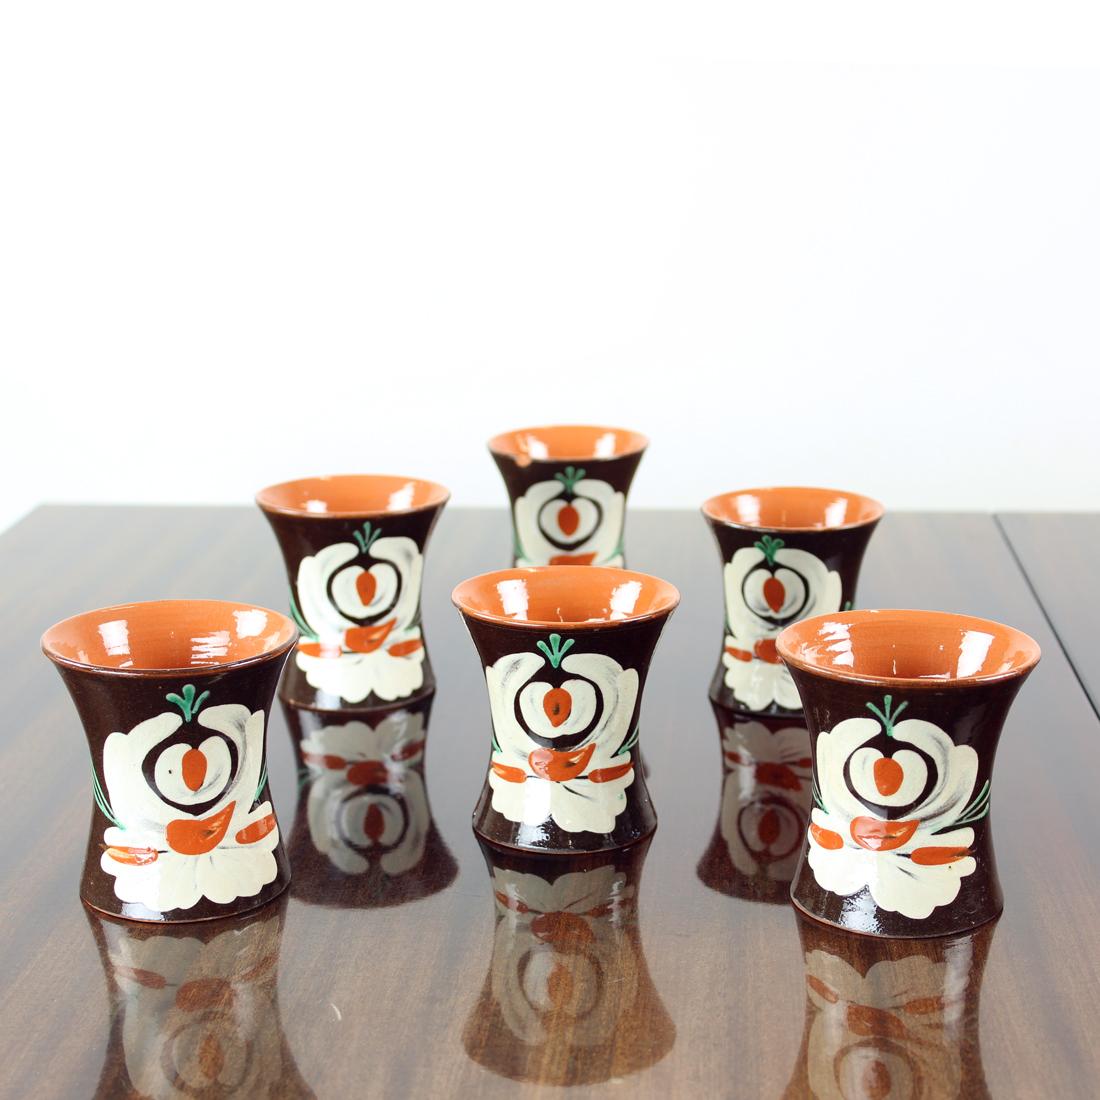 Unique and rare set of vintage cups. Produced in Pozdisovce region in Czechoslovakia which is famous for the style. It always has a black/dark background where floral ornaments in vivid colors are painted on. The cups are a set produced in 1950s,